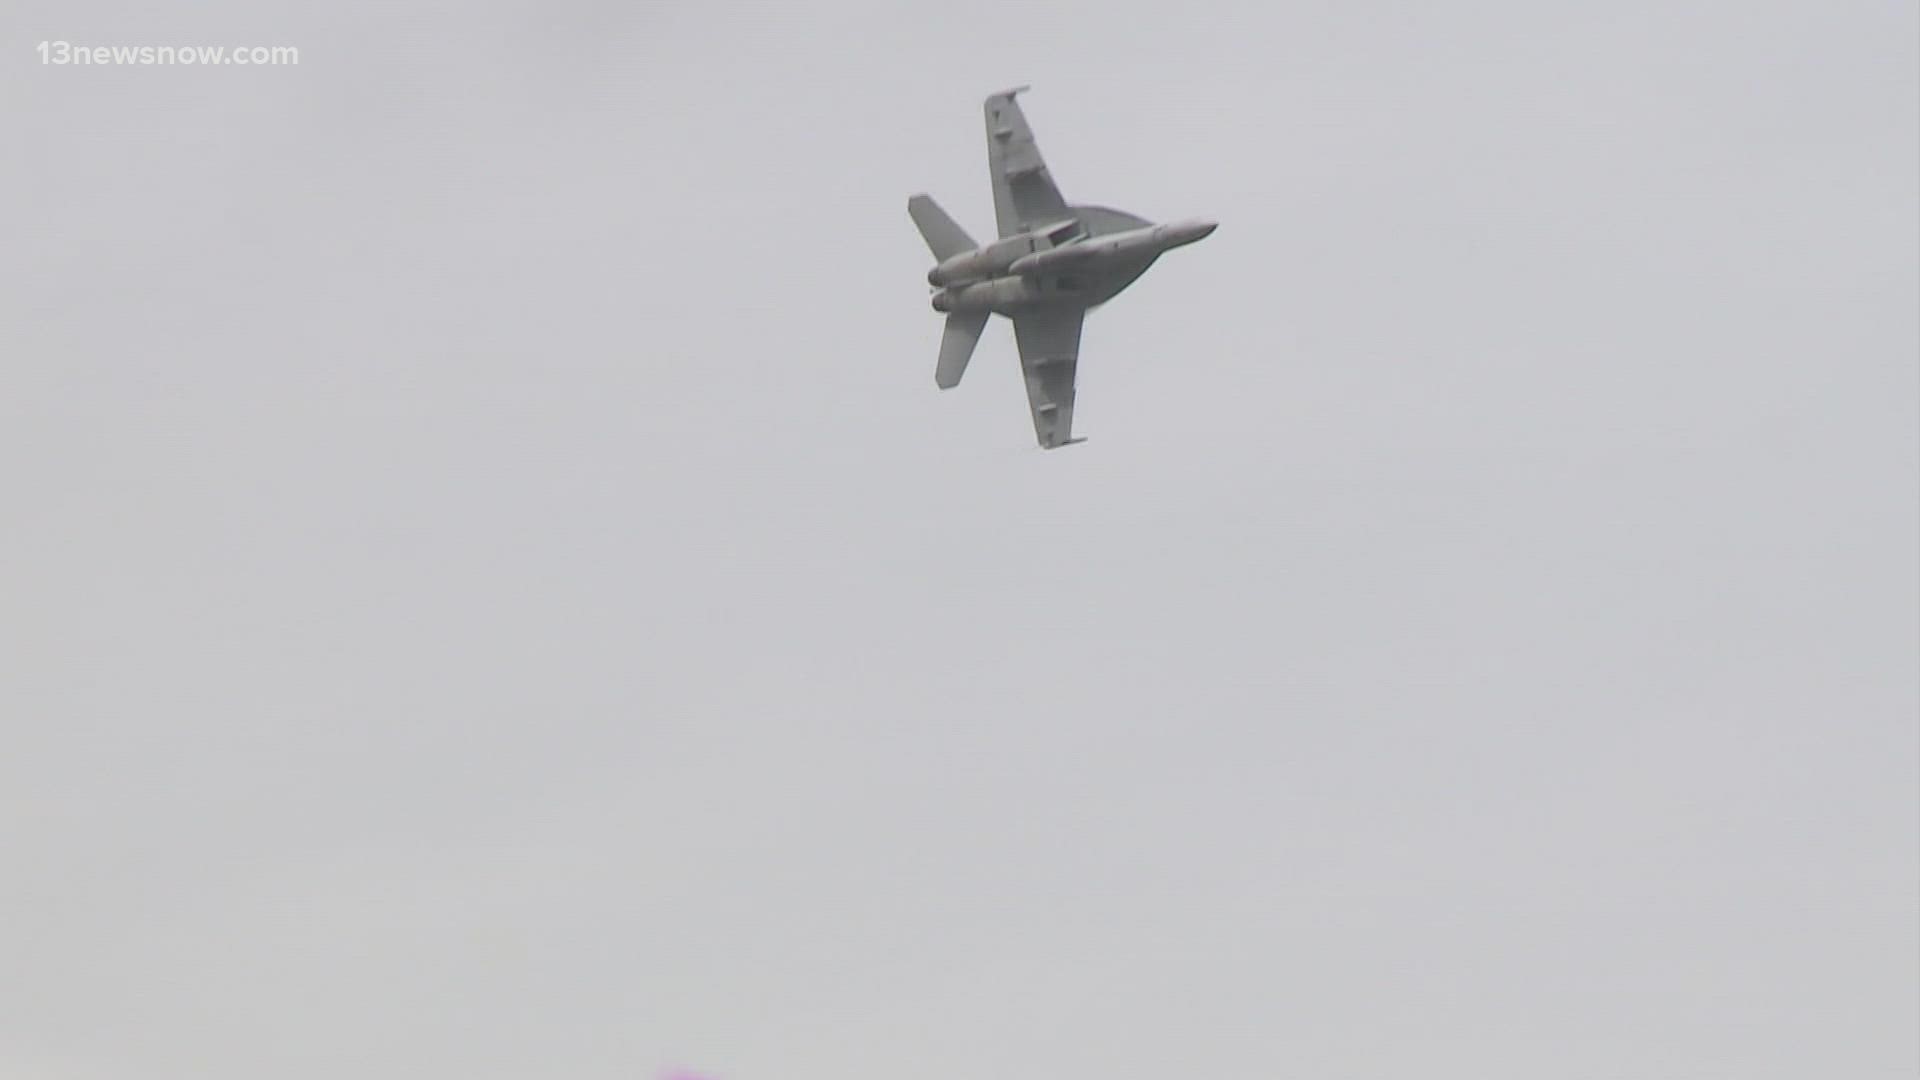 Organizers said earlier the show at the naval air station was contingent upon the level of community spread of COVID-19, which has jumped significantly in Virginia.